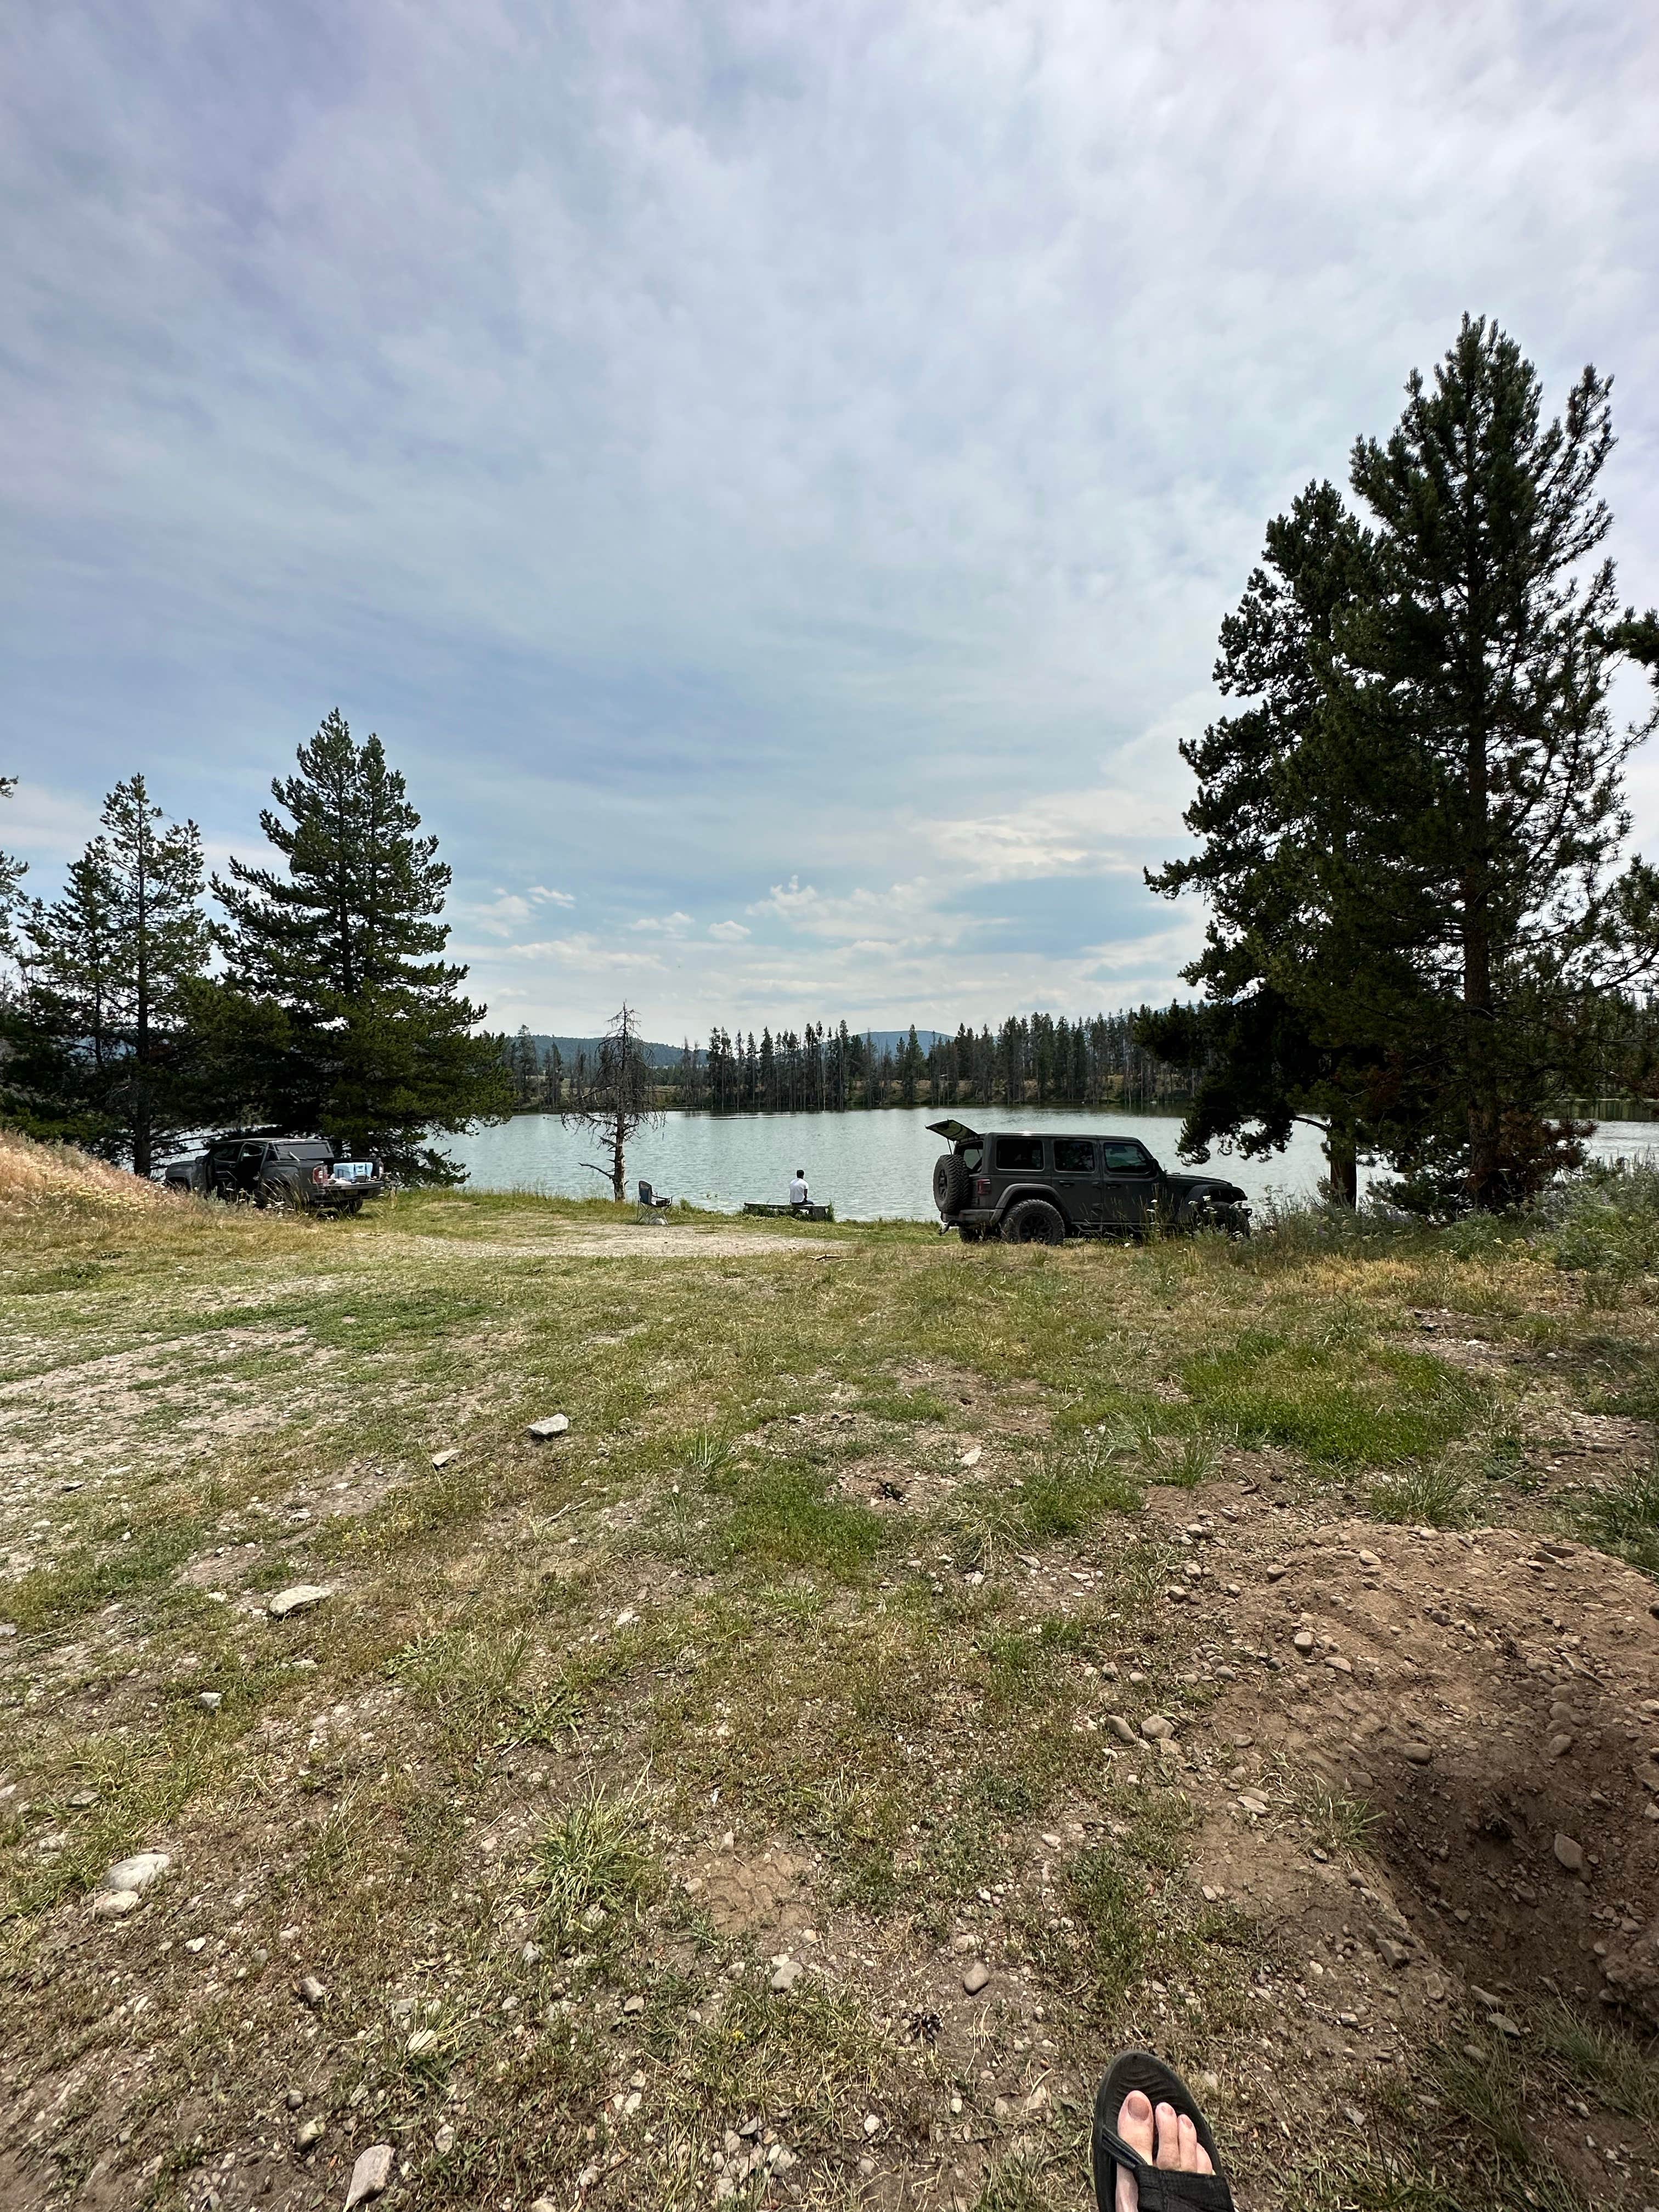 Camper submitted image from North Van Houten Campground - 4